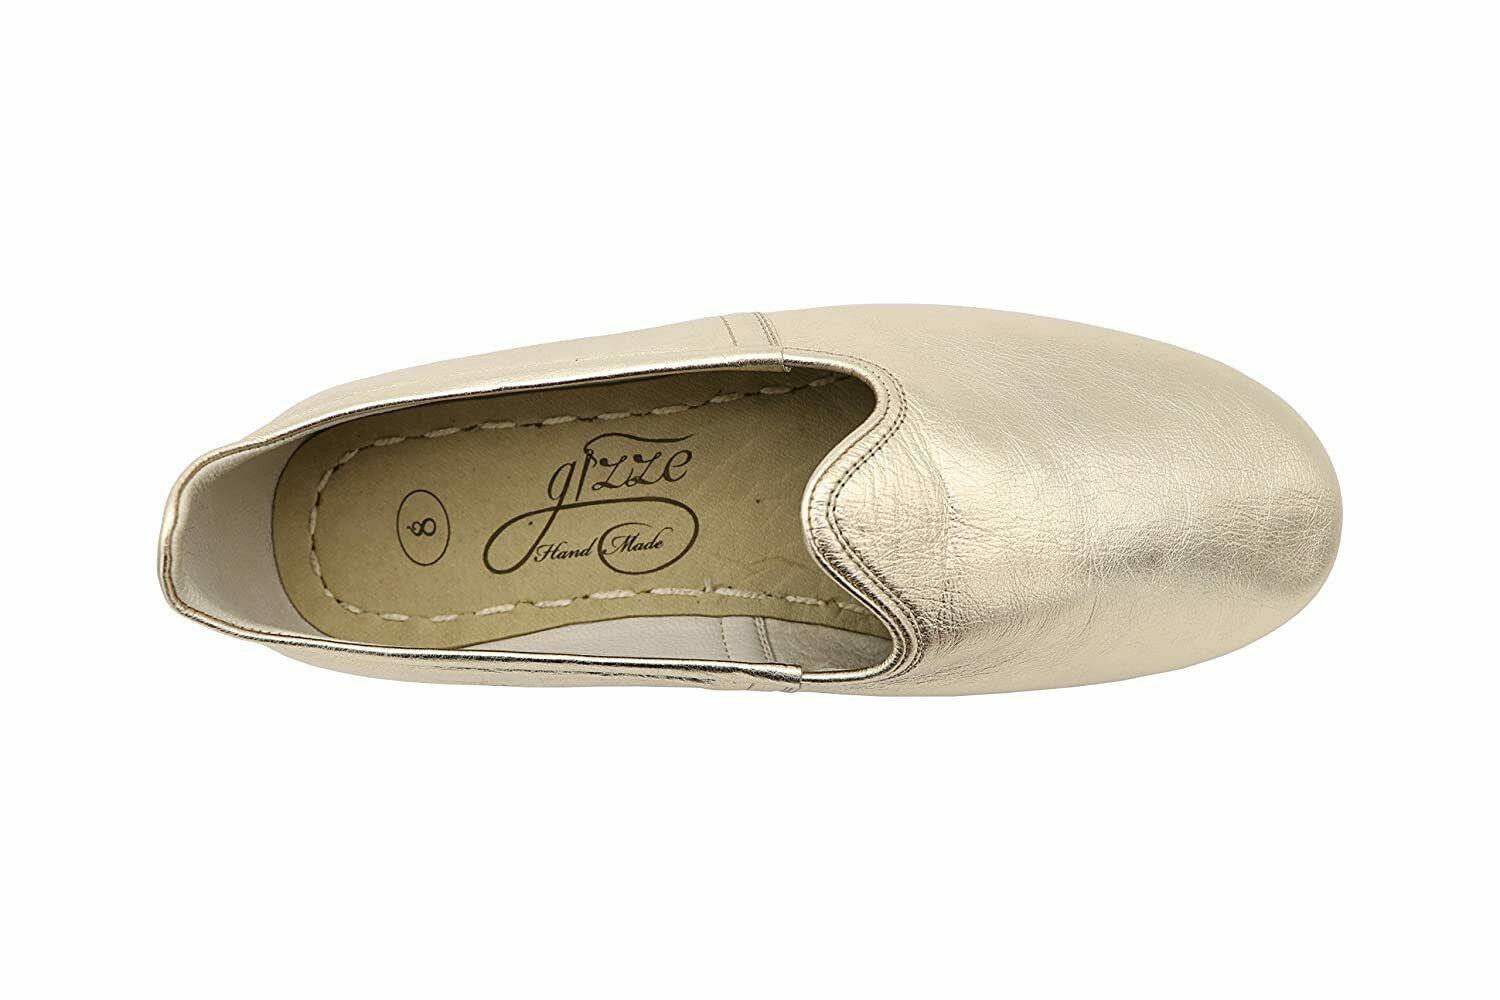 GIZZE Handmade GOLD Leather Slip-On loafers Shoes Size 8 - SVNYFancy